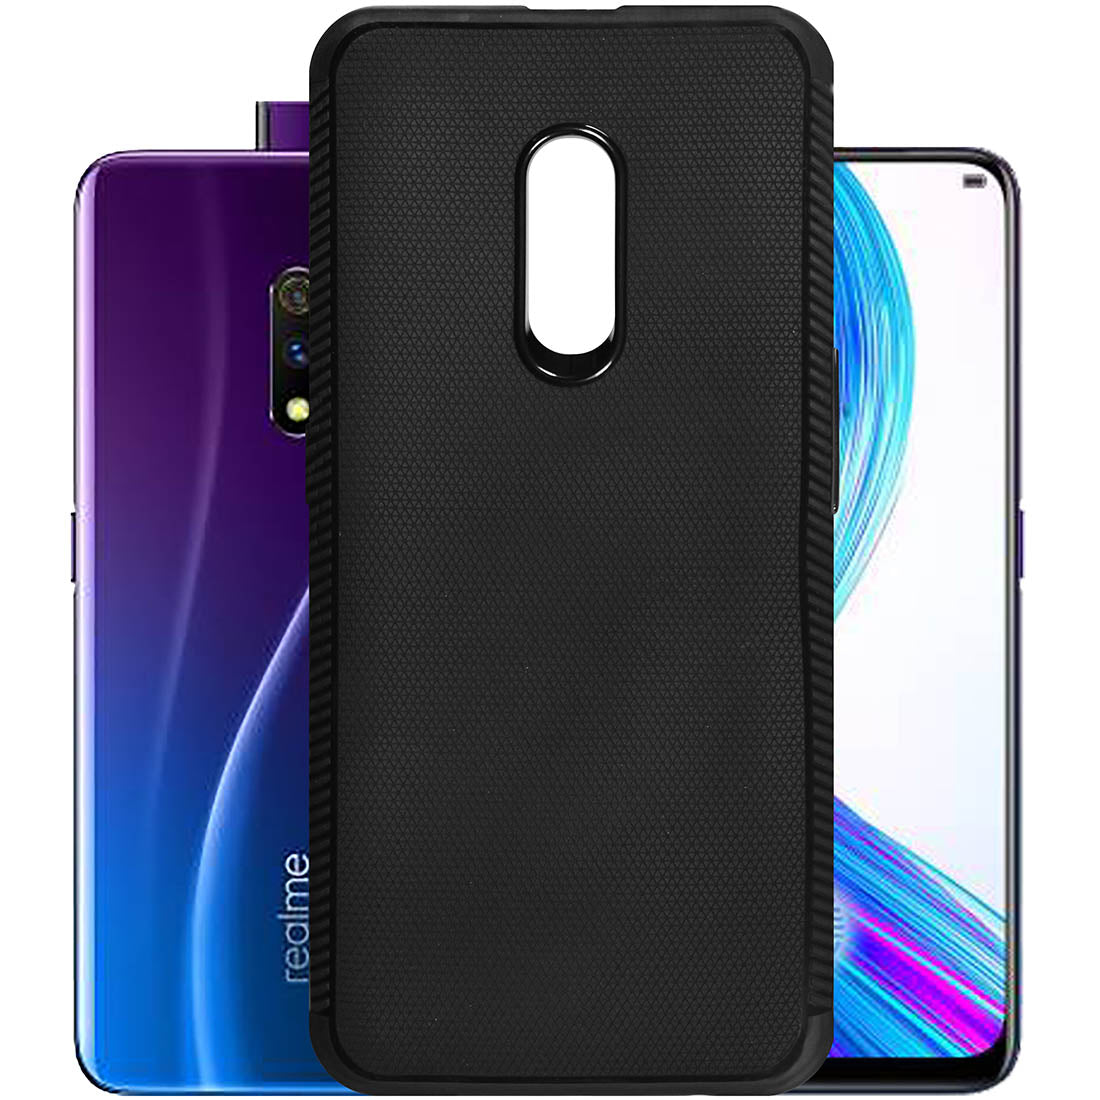 Comfort Grip Back Case Cover for Realme X